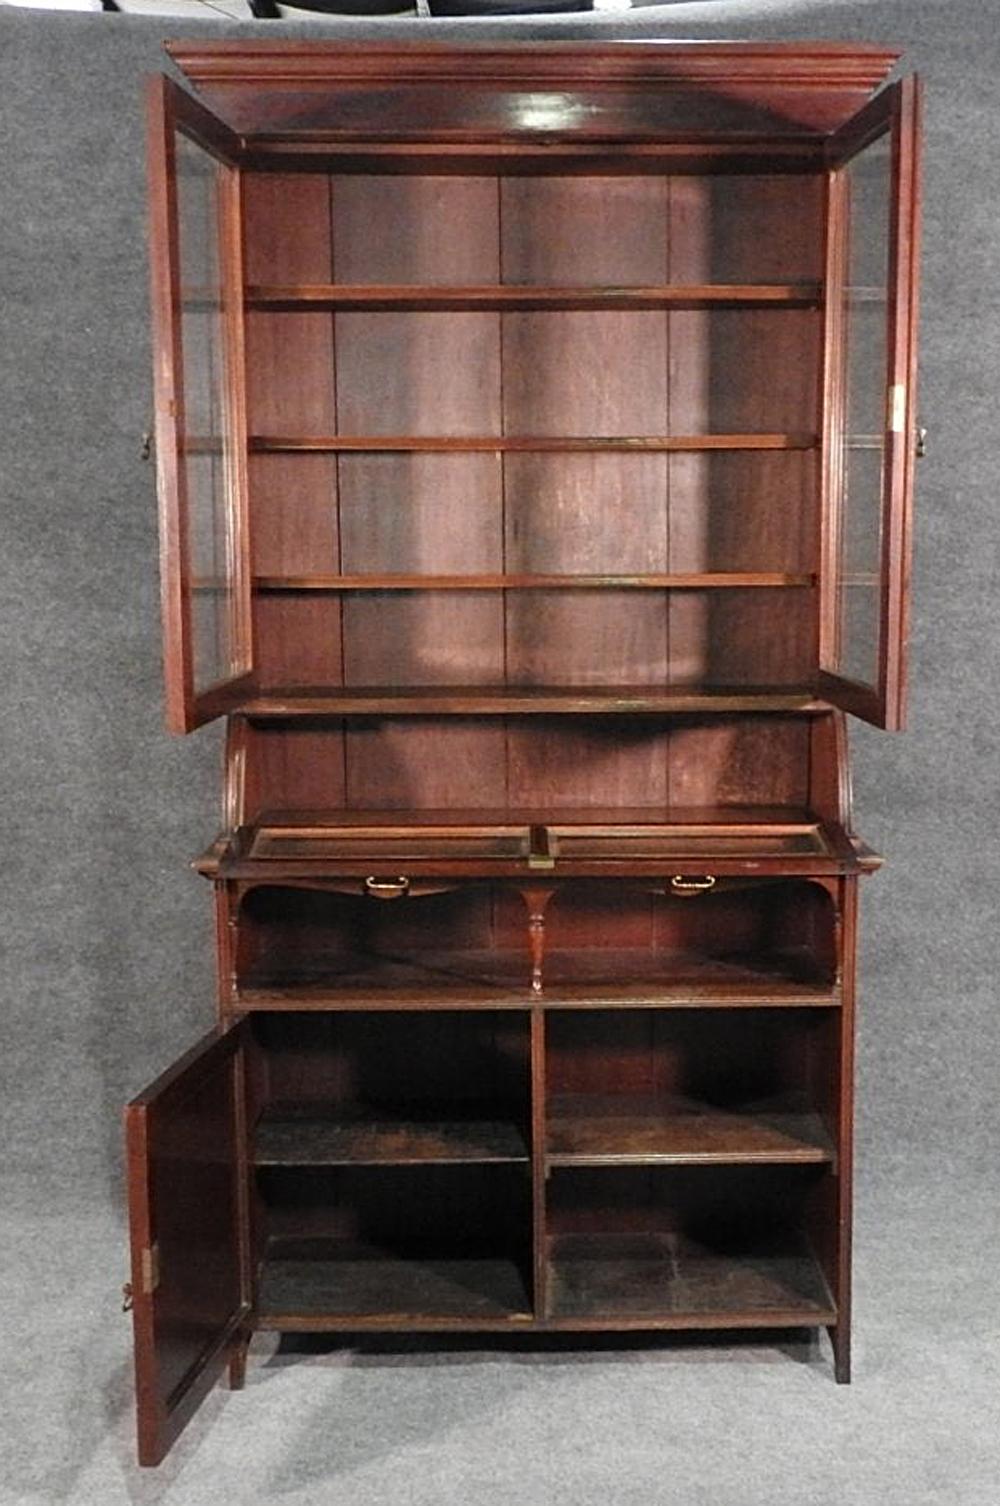 This is a unique antique English cupboard or china cabinet. With one lower door and one open shelf next to it, this piece is rather unique in its confirguration. The cabinet dates to the 1900-1910 era and is in its original patina and has signs of